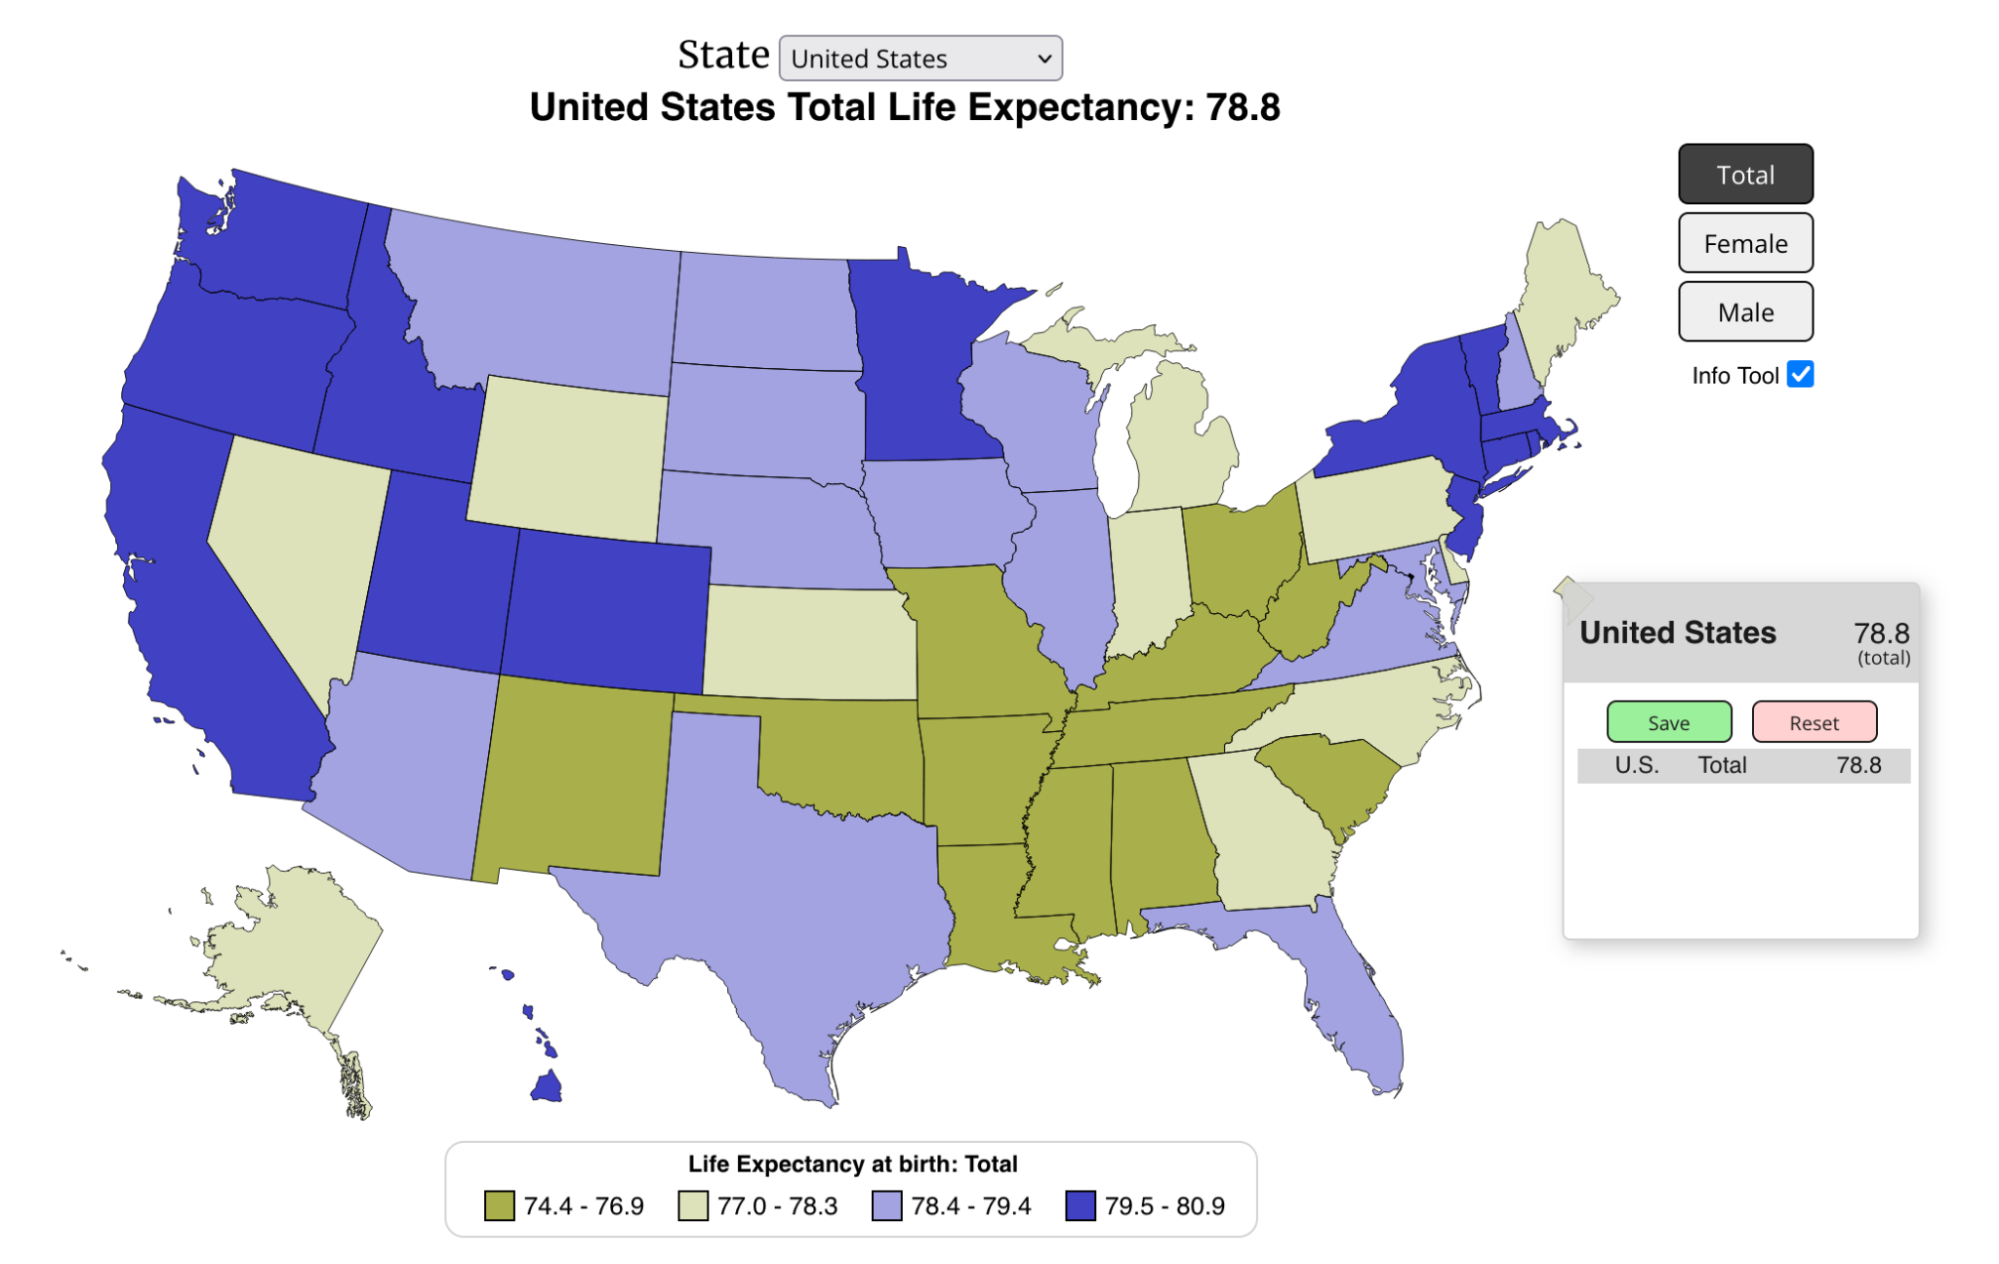 US, Total Life Expectancy